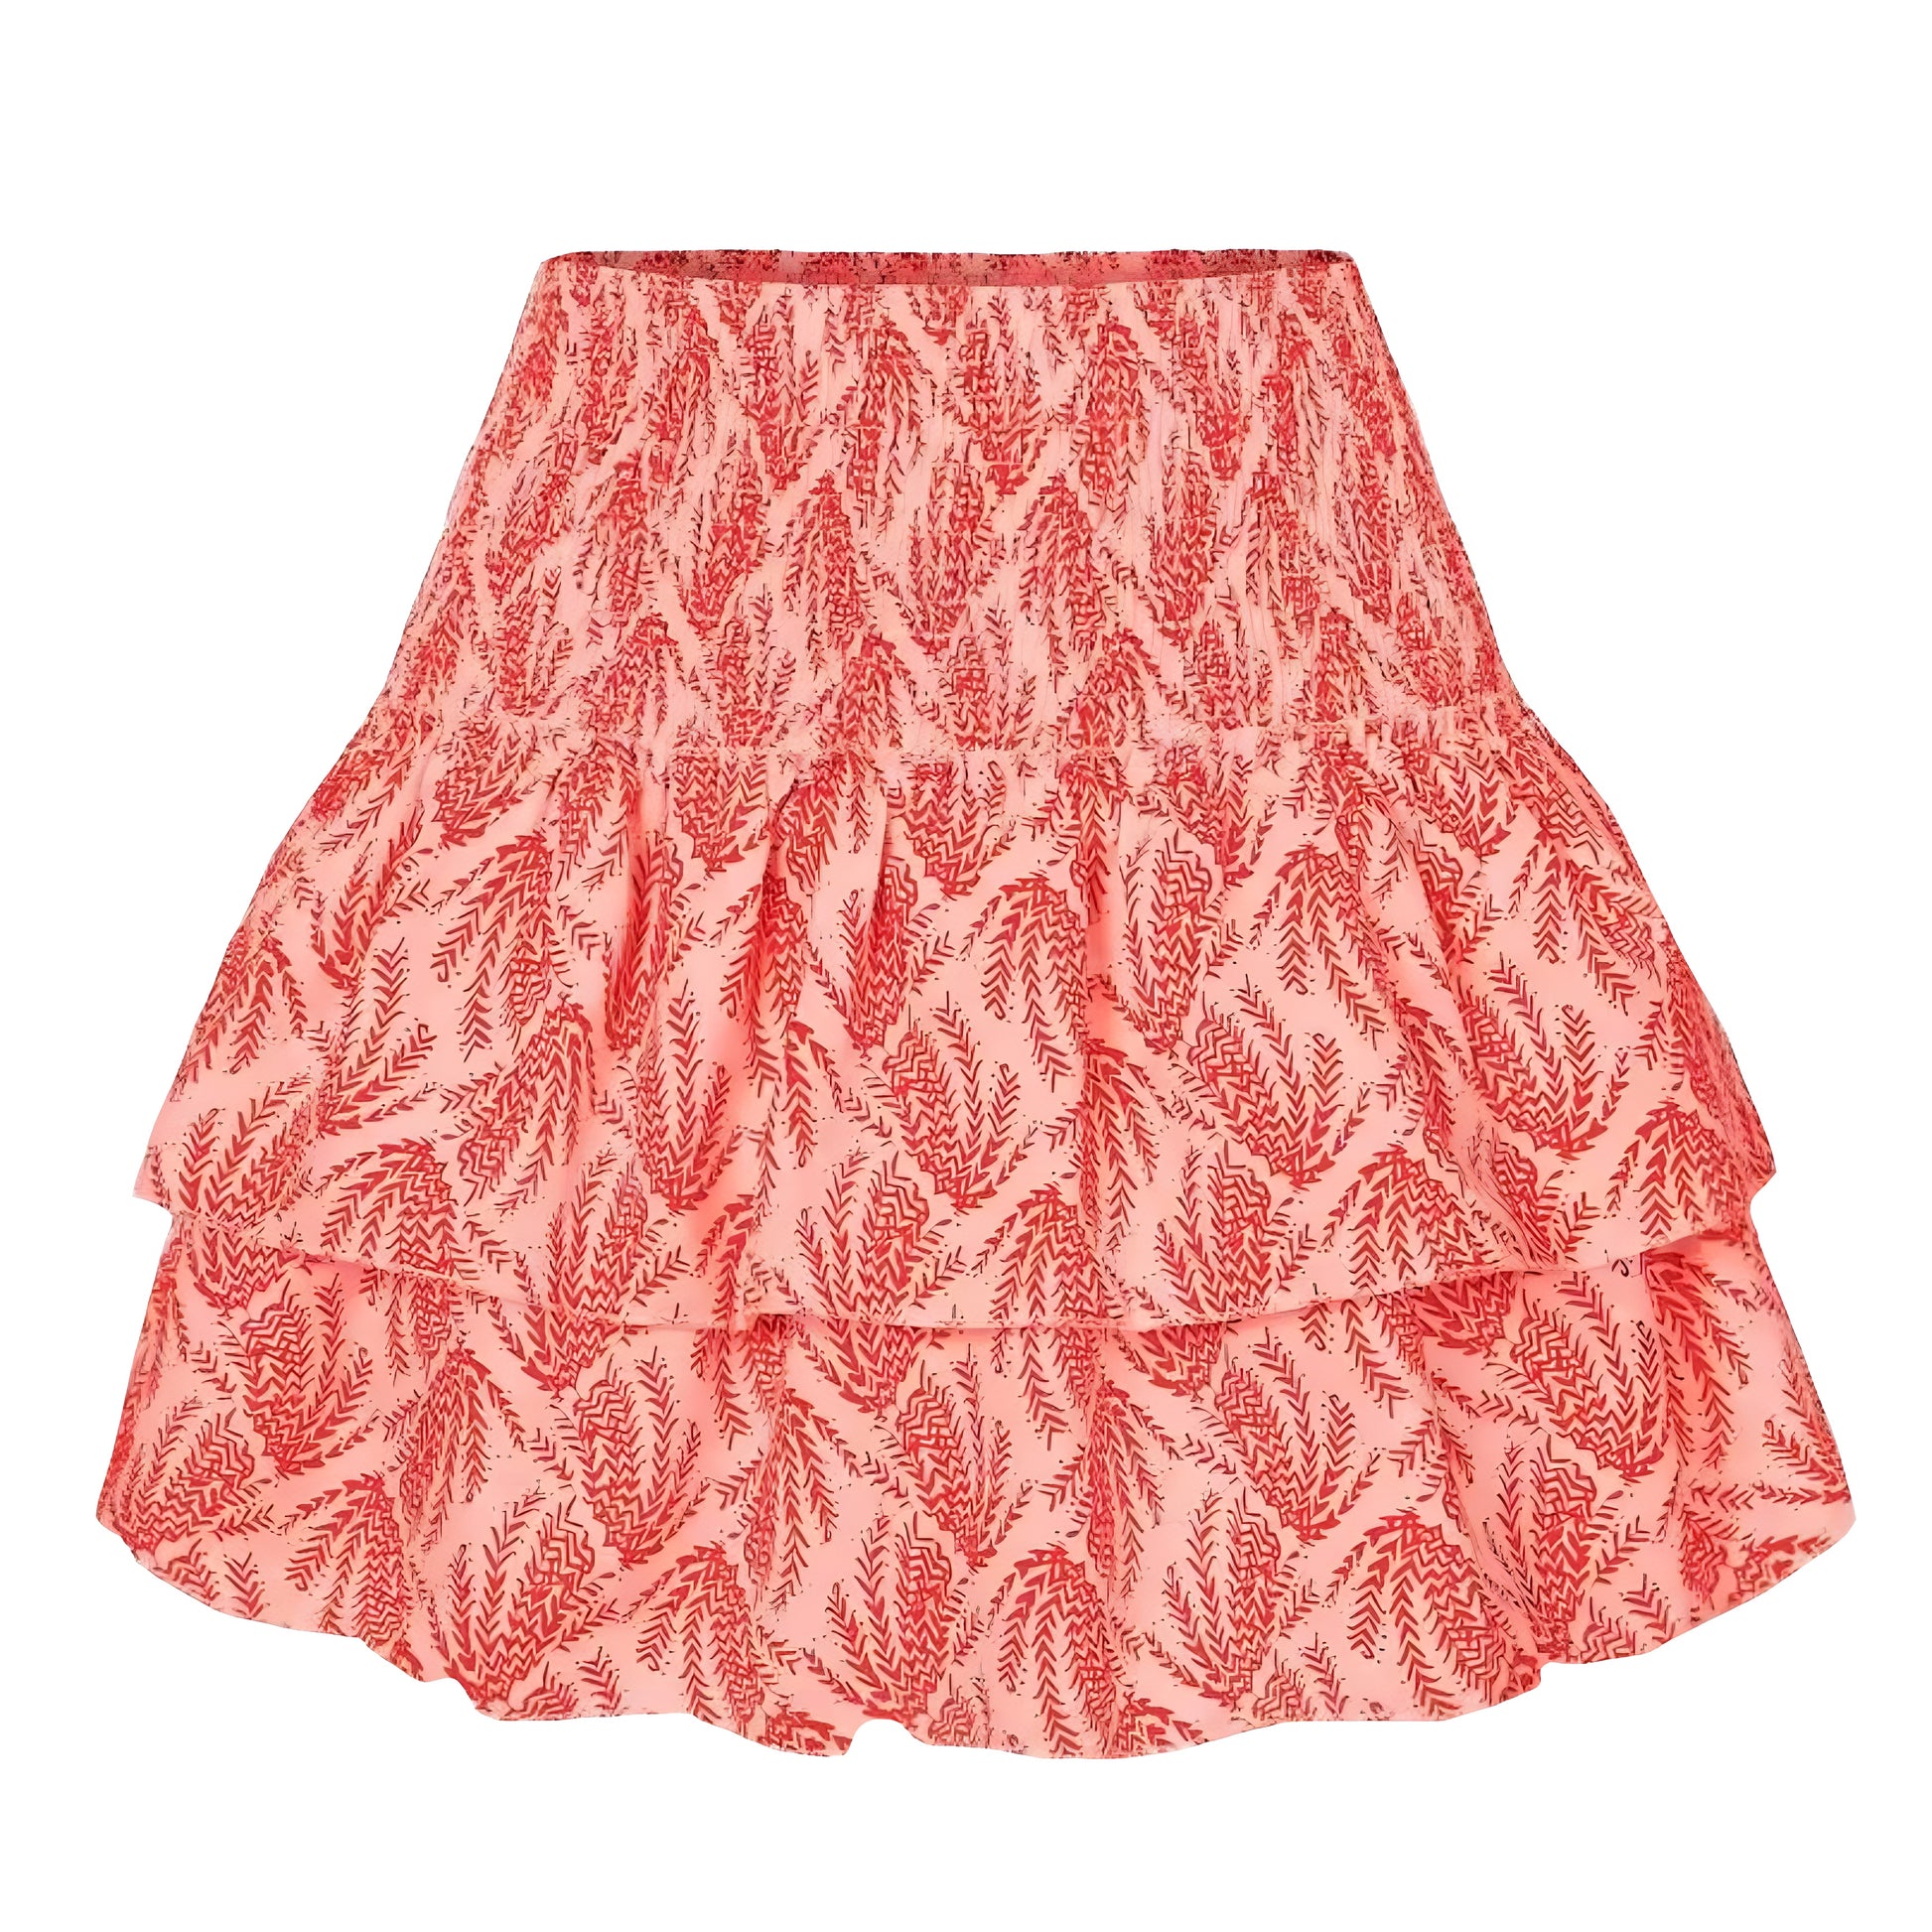 orange-multi-color-floral-patterned-layered-ruffle-smocked-fitted-waist-tiered-shirred-bodice-mid-high-rise-waisted-flowy-boho-tullie-tutu-mini-skirt-skort-women-ladies-chic-trendy-spring-2024-summer-casual-feminine-preppy-style-party-tropical-vacation-beach-wear-zara-altard-state-revolve-garage-pacsun